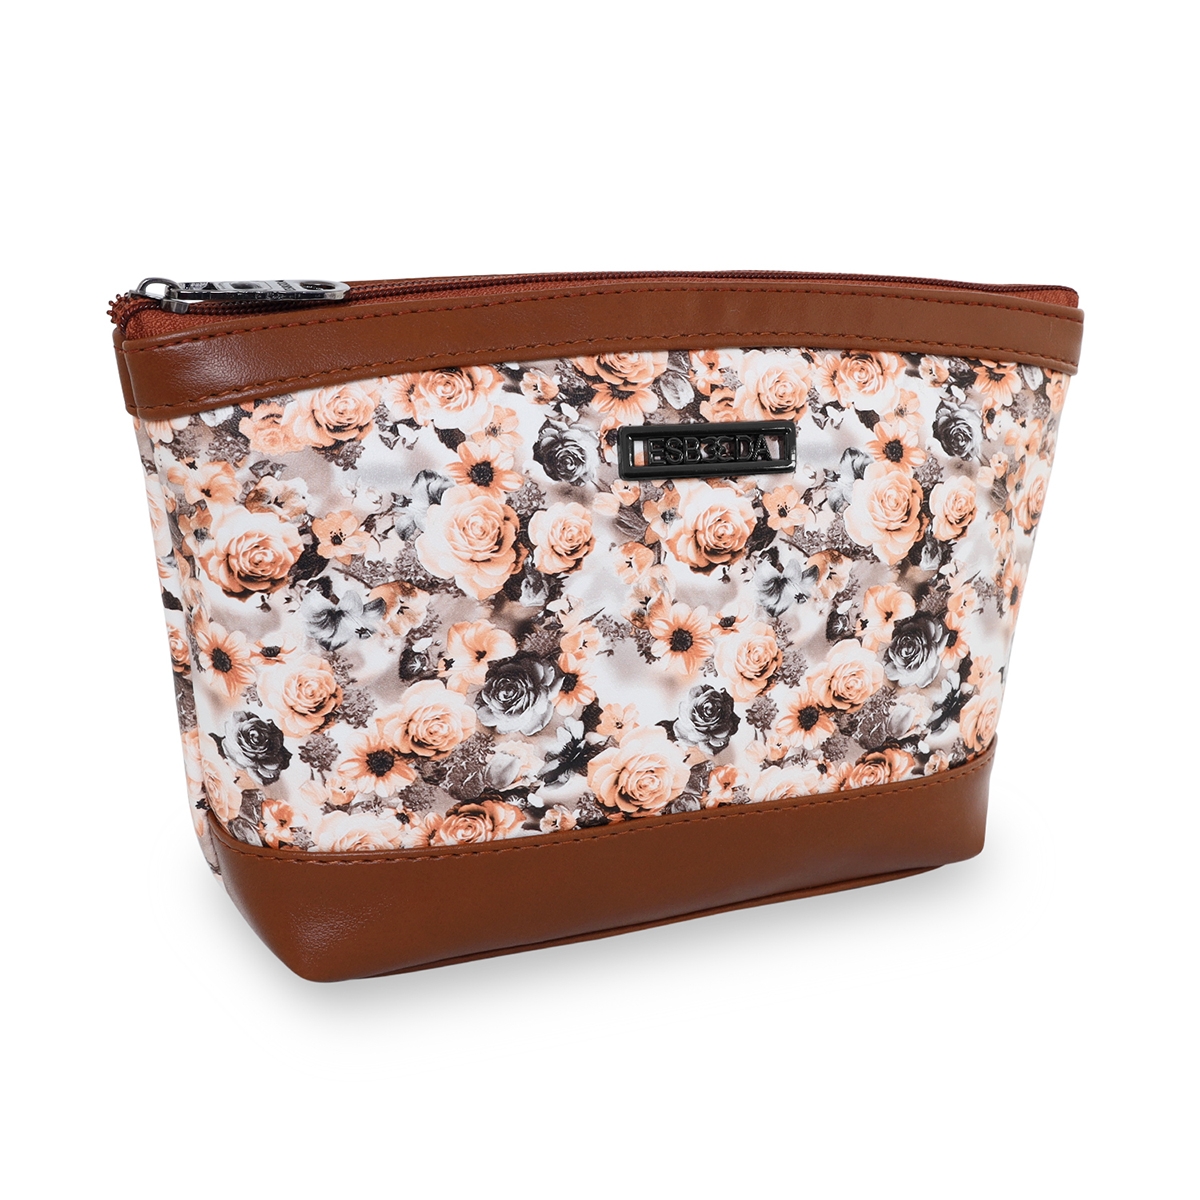 ESBEDA | ESBEDA Tan Color Floral Print Pouch For Women Pack of 2 8